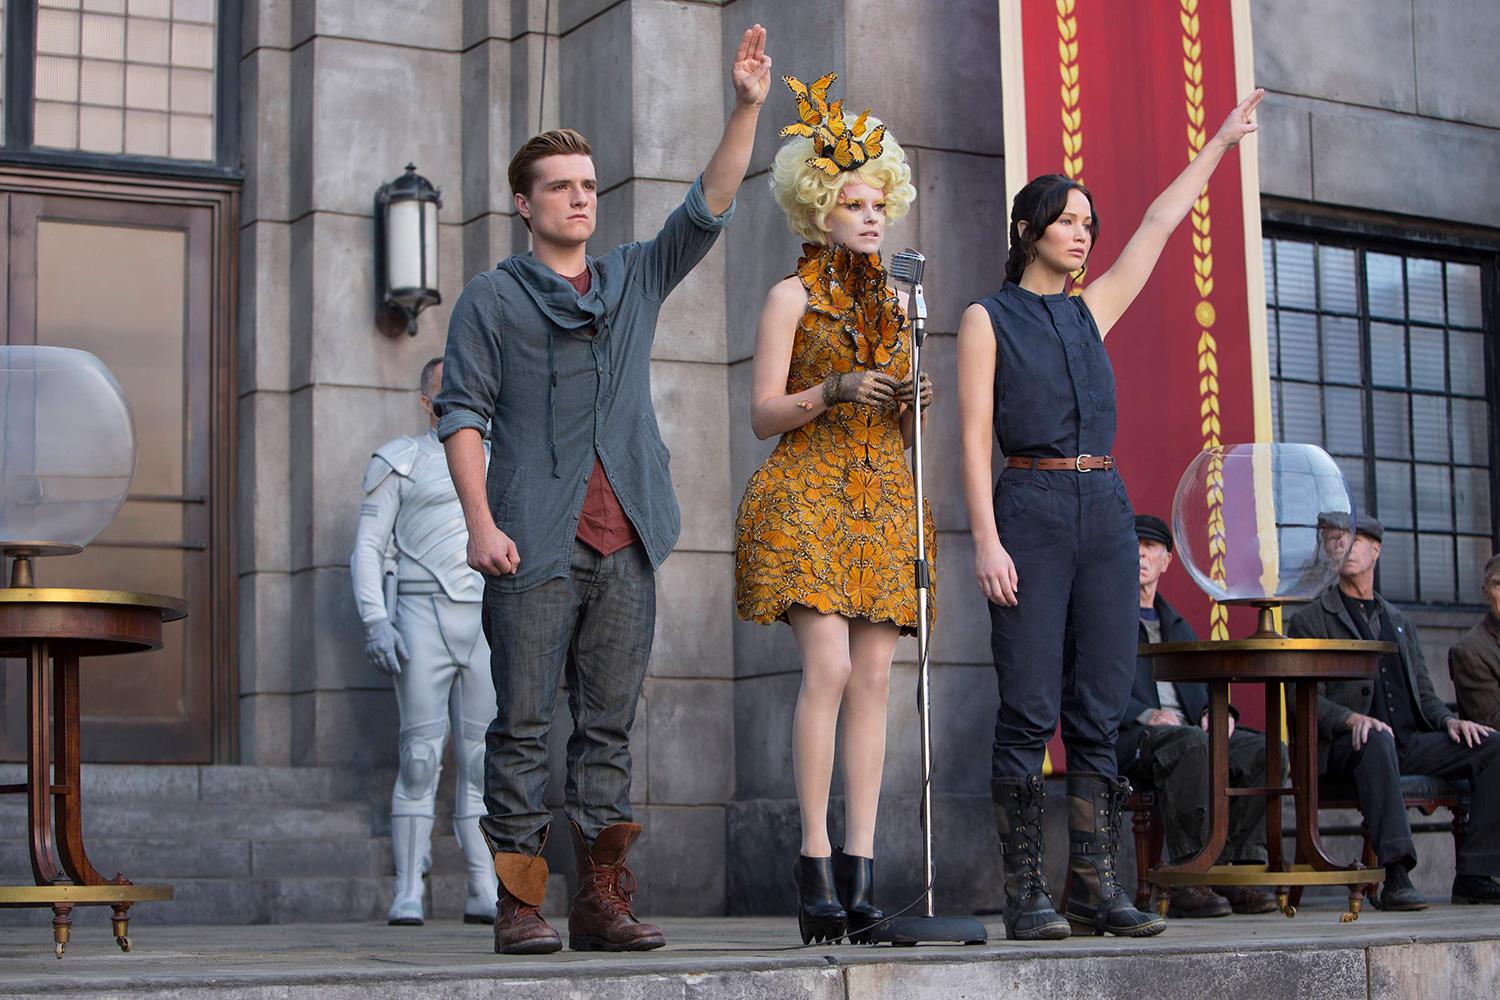 Characters salute in a scene from The Hunger Games Catching Fire.